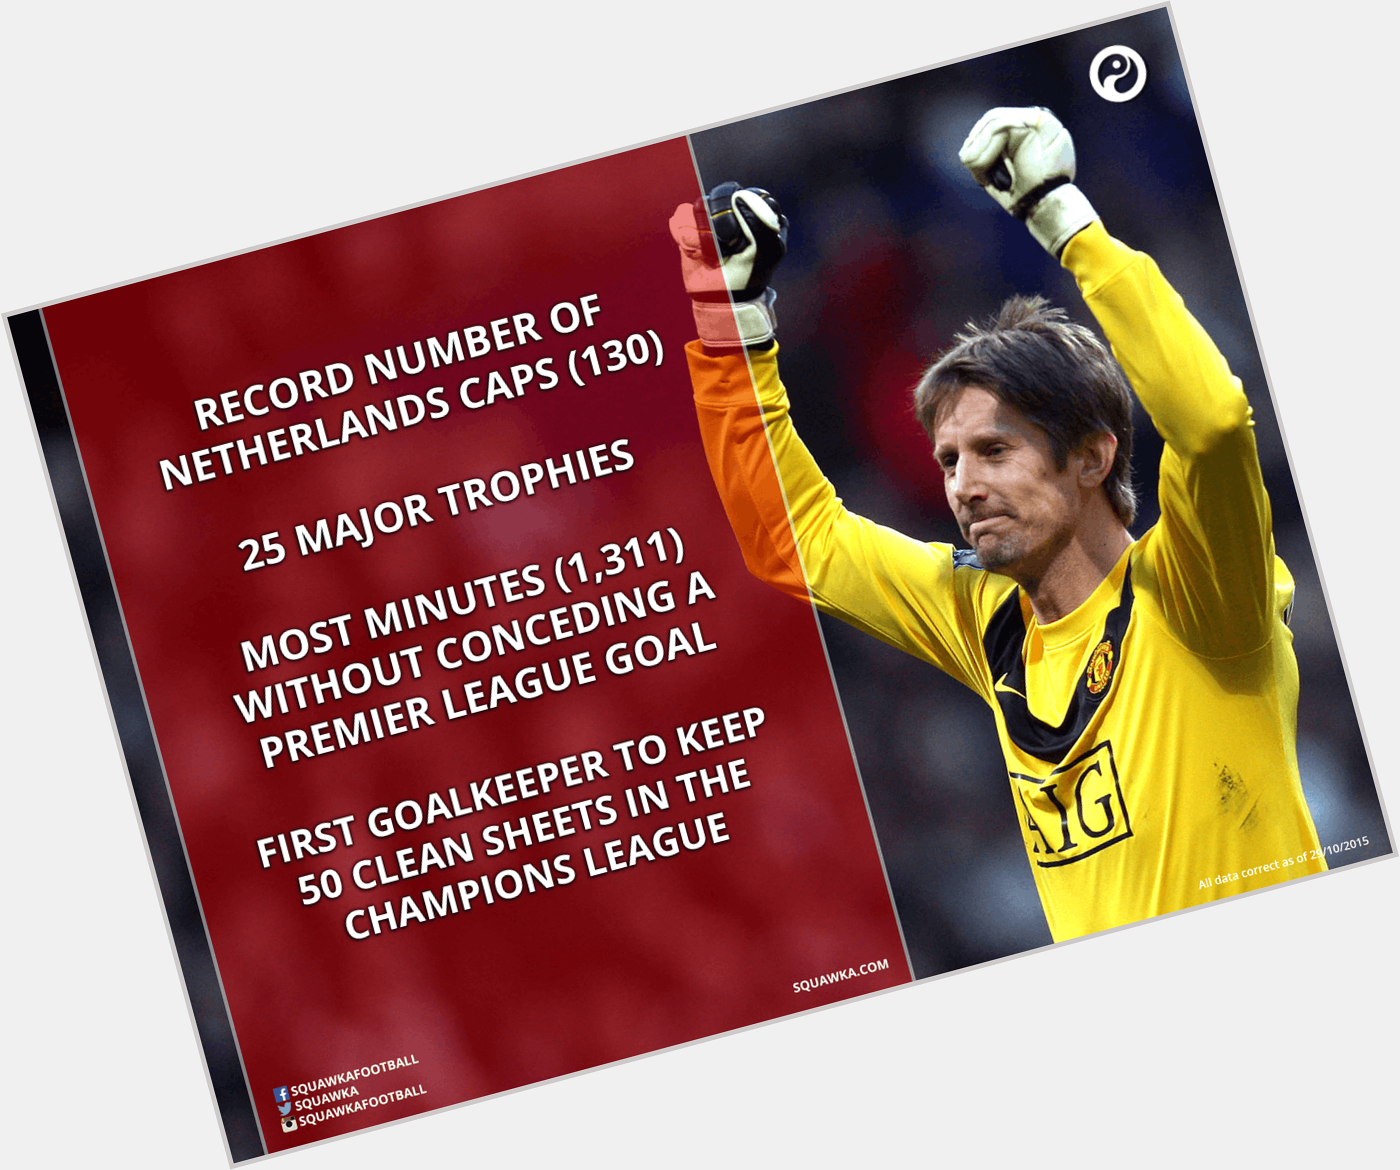 Happy 45th birthday to Edwin van der Sar, winner of 25 major titles & record number of caps (130) for Netherlands. 